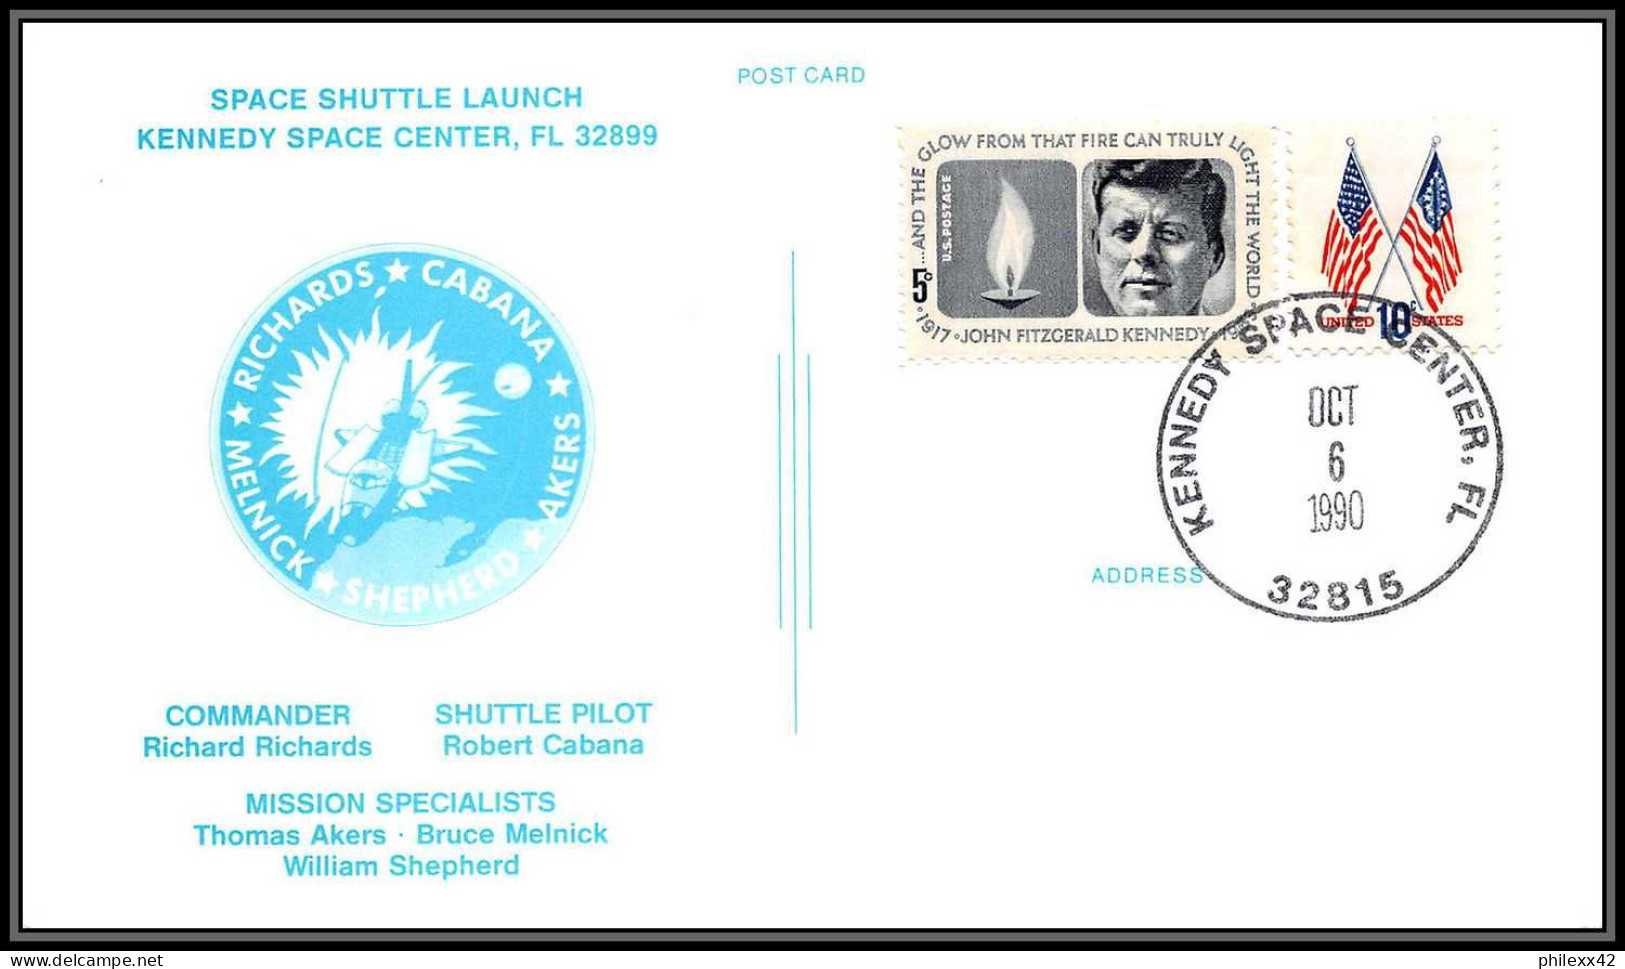 1843 Espace (space Raumfahrt) Lettre (cover Briefe) USA Start STS 41 Discovery Shuttle (navette) 6/10/1990 - United States